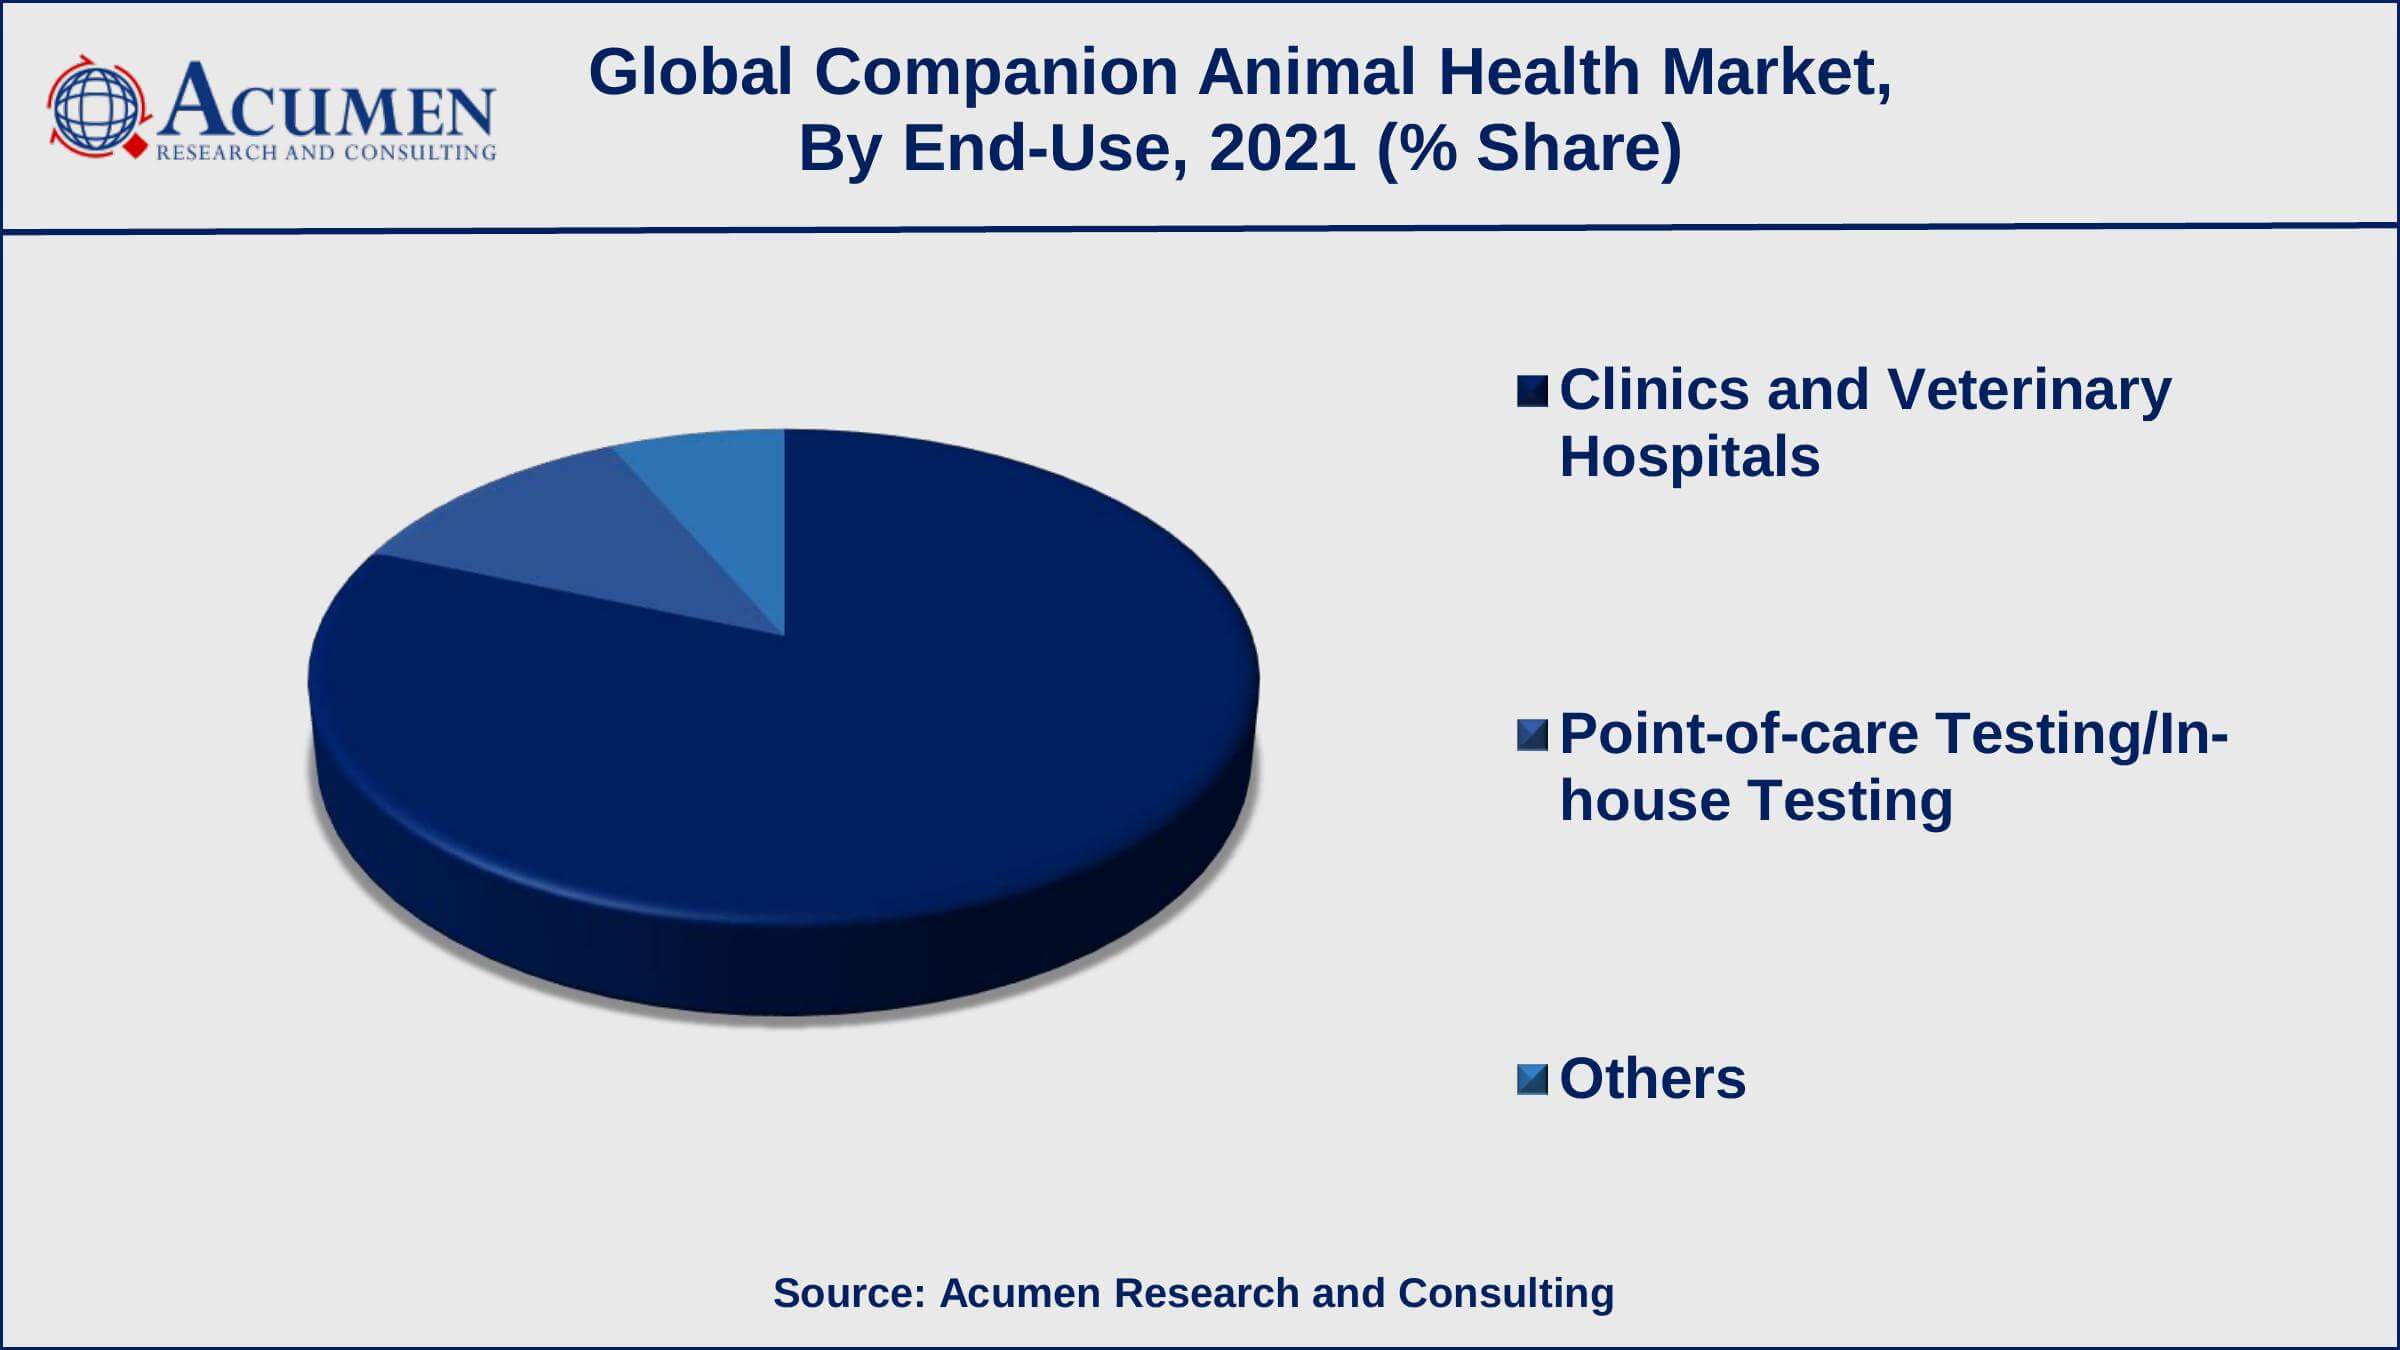 Rising adoption of pets across the world is a popular companion animal health market trend that fuels the industry demand